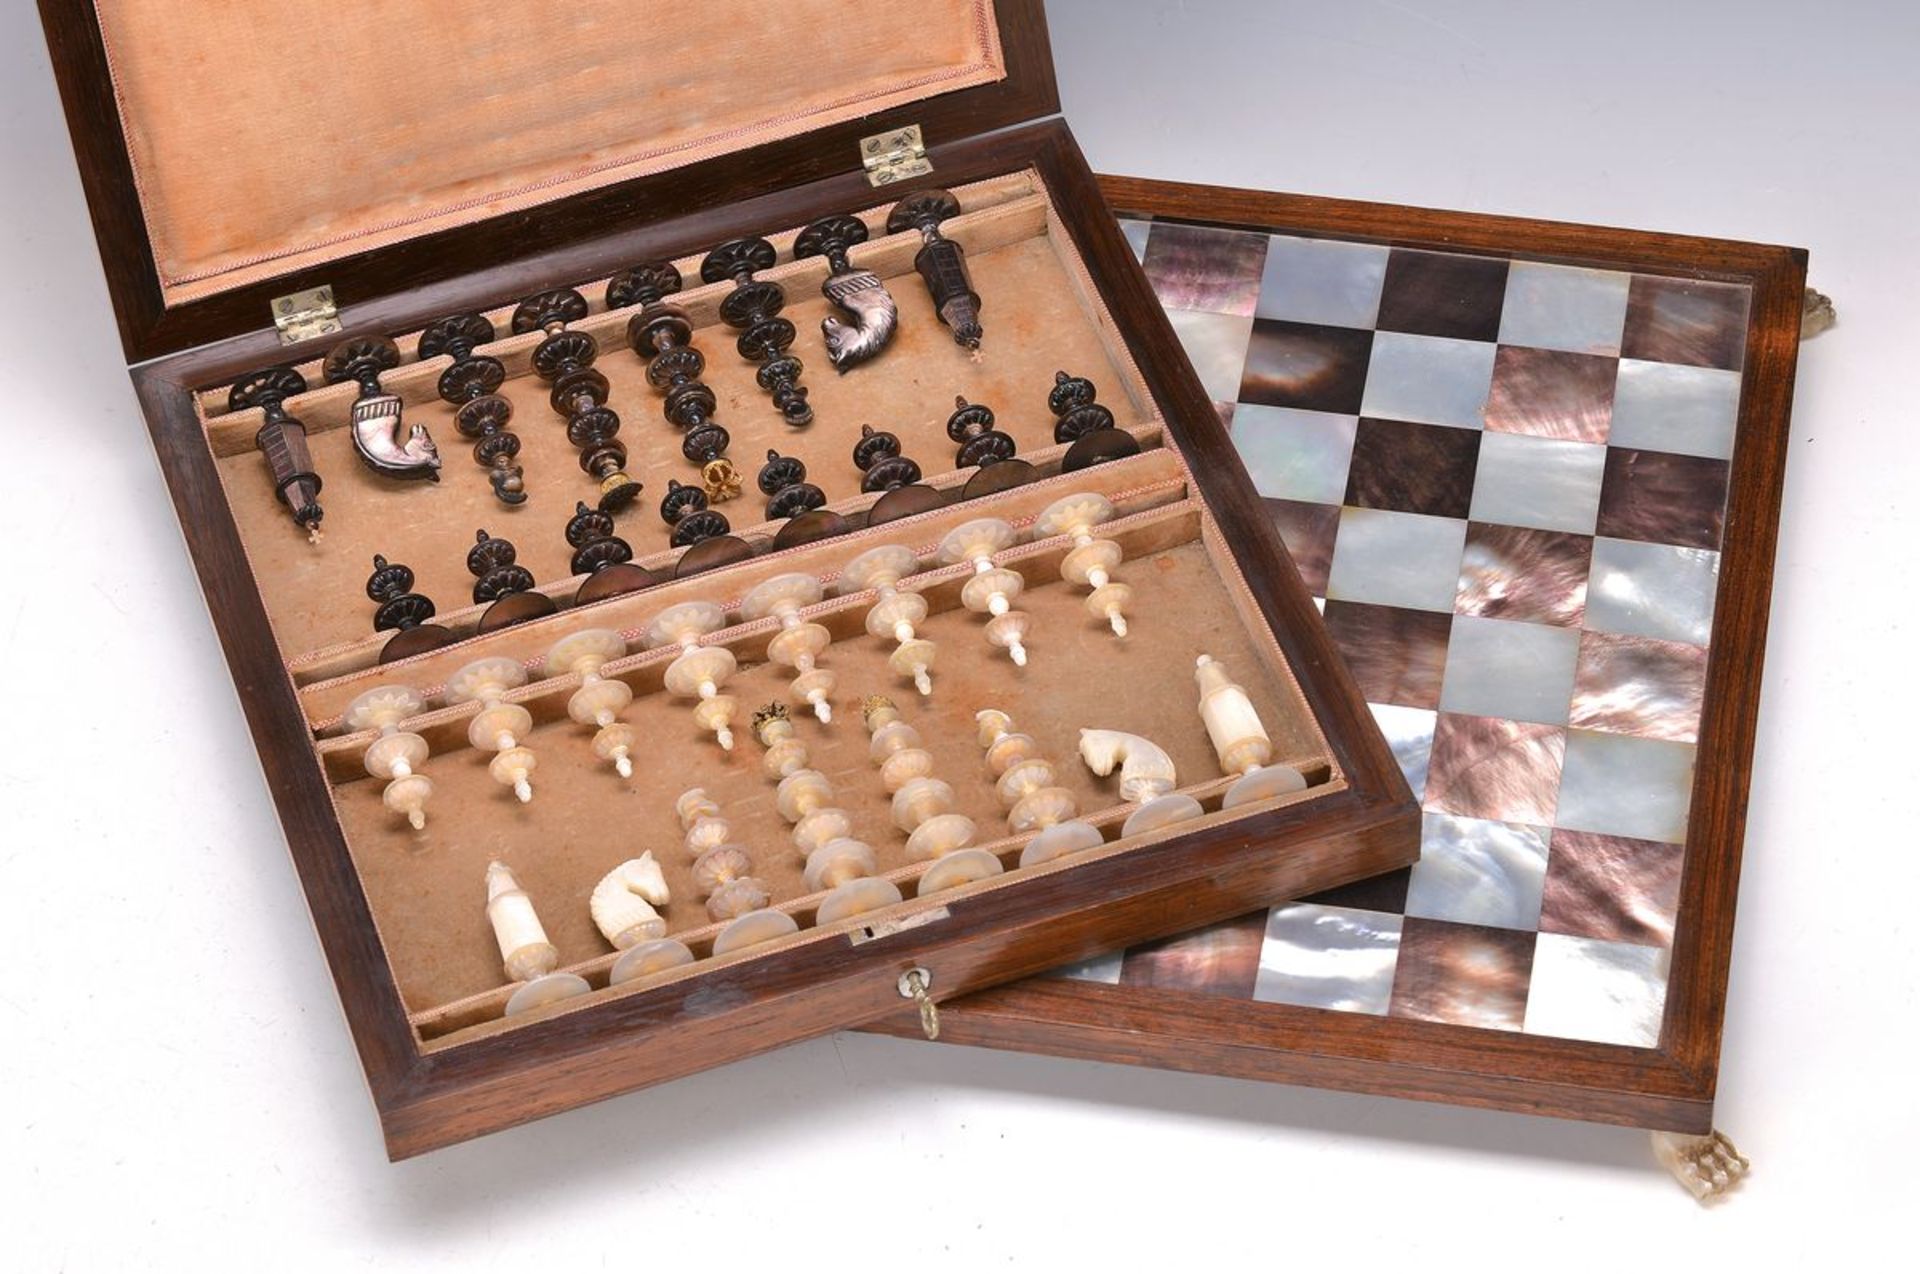 chess, England, Middle of 19th c., mother-of- pearl, turned meeples, brown and white, complete